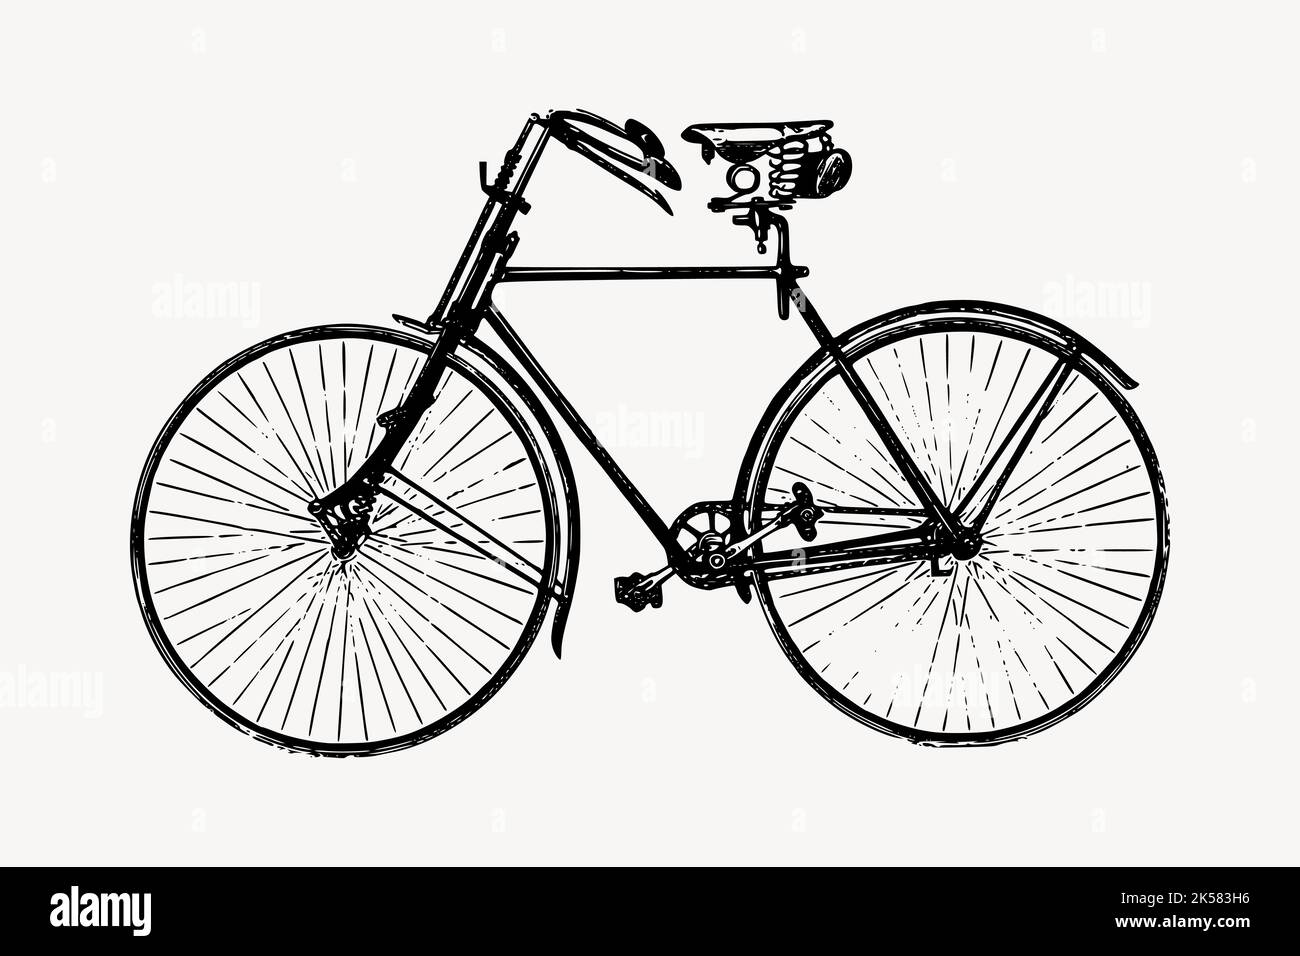 Simple bicycle icon black lines bike drawing Vector Image